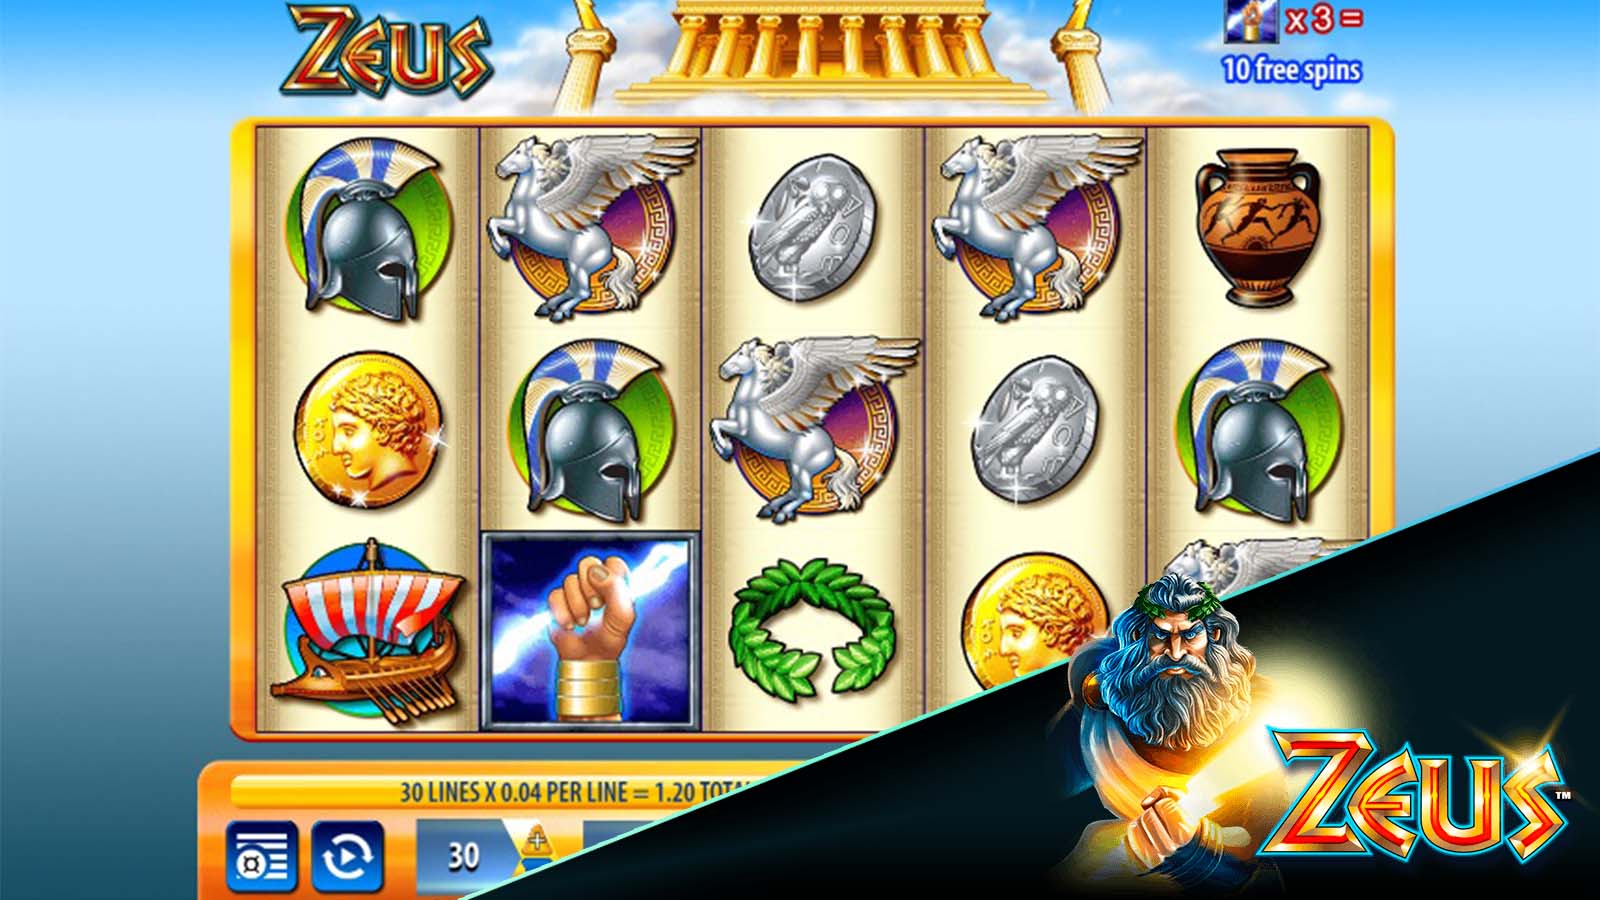 Zeus The Best Online Pokies You Can Find in Land-Based Casinos